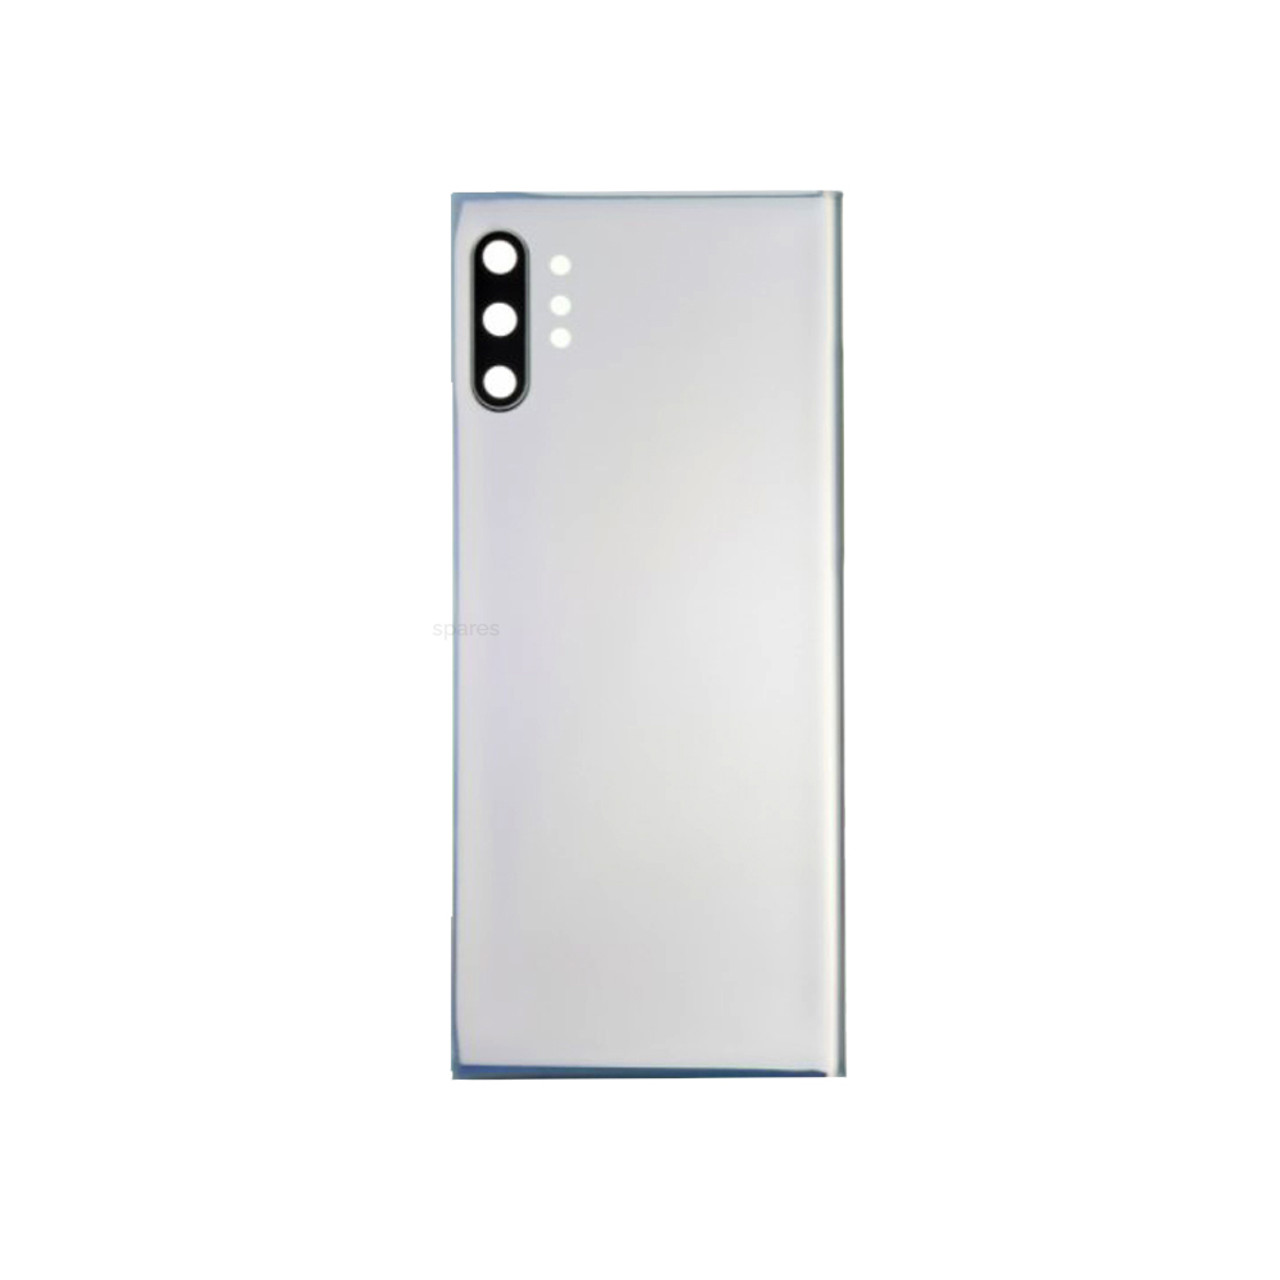 Replace Back Glass Lens&Adshive Galaxy Note 10+ SM-N975F Aura Glow